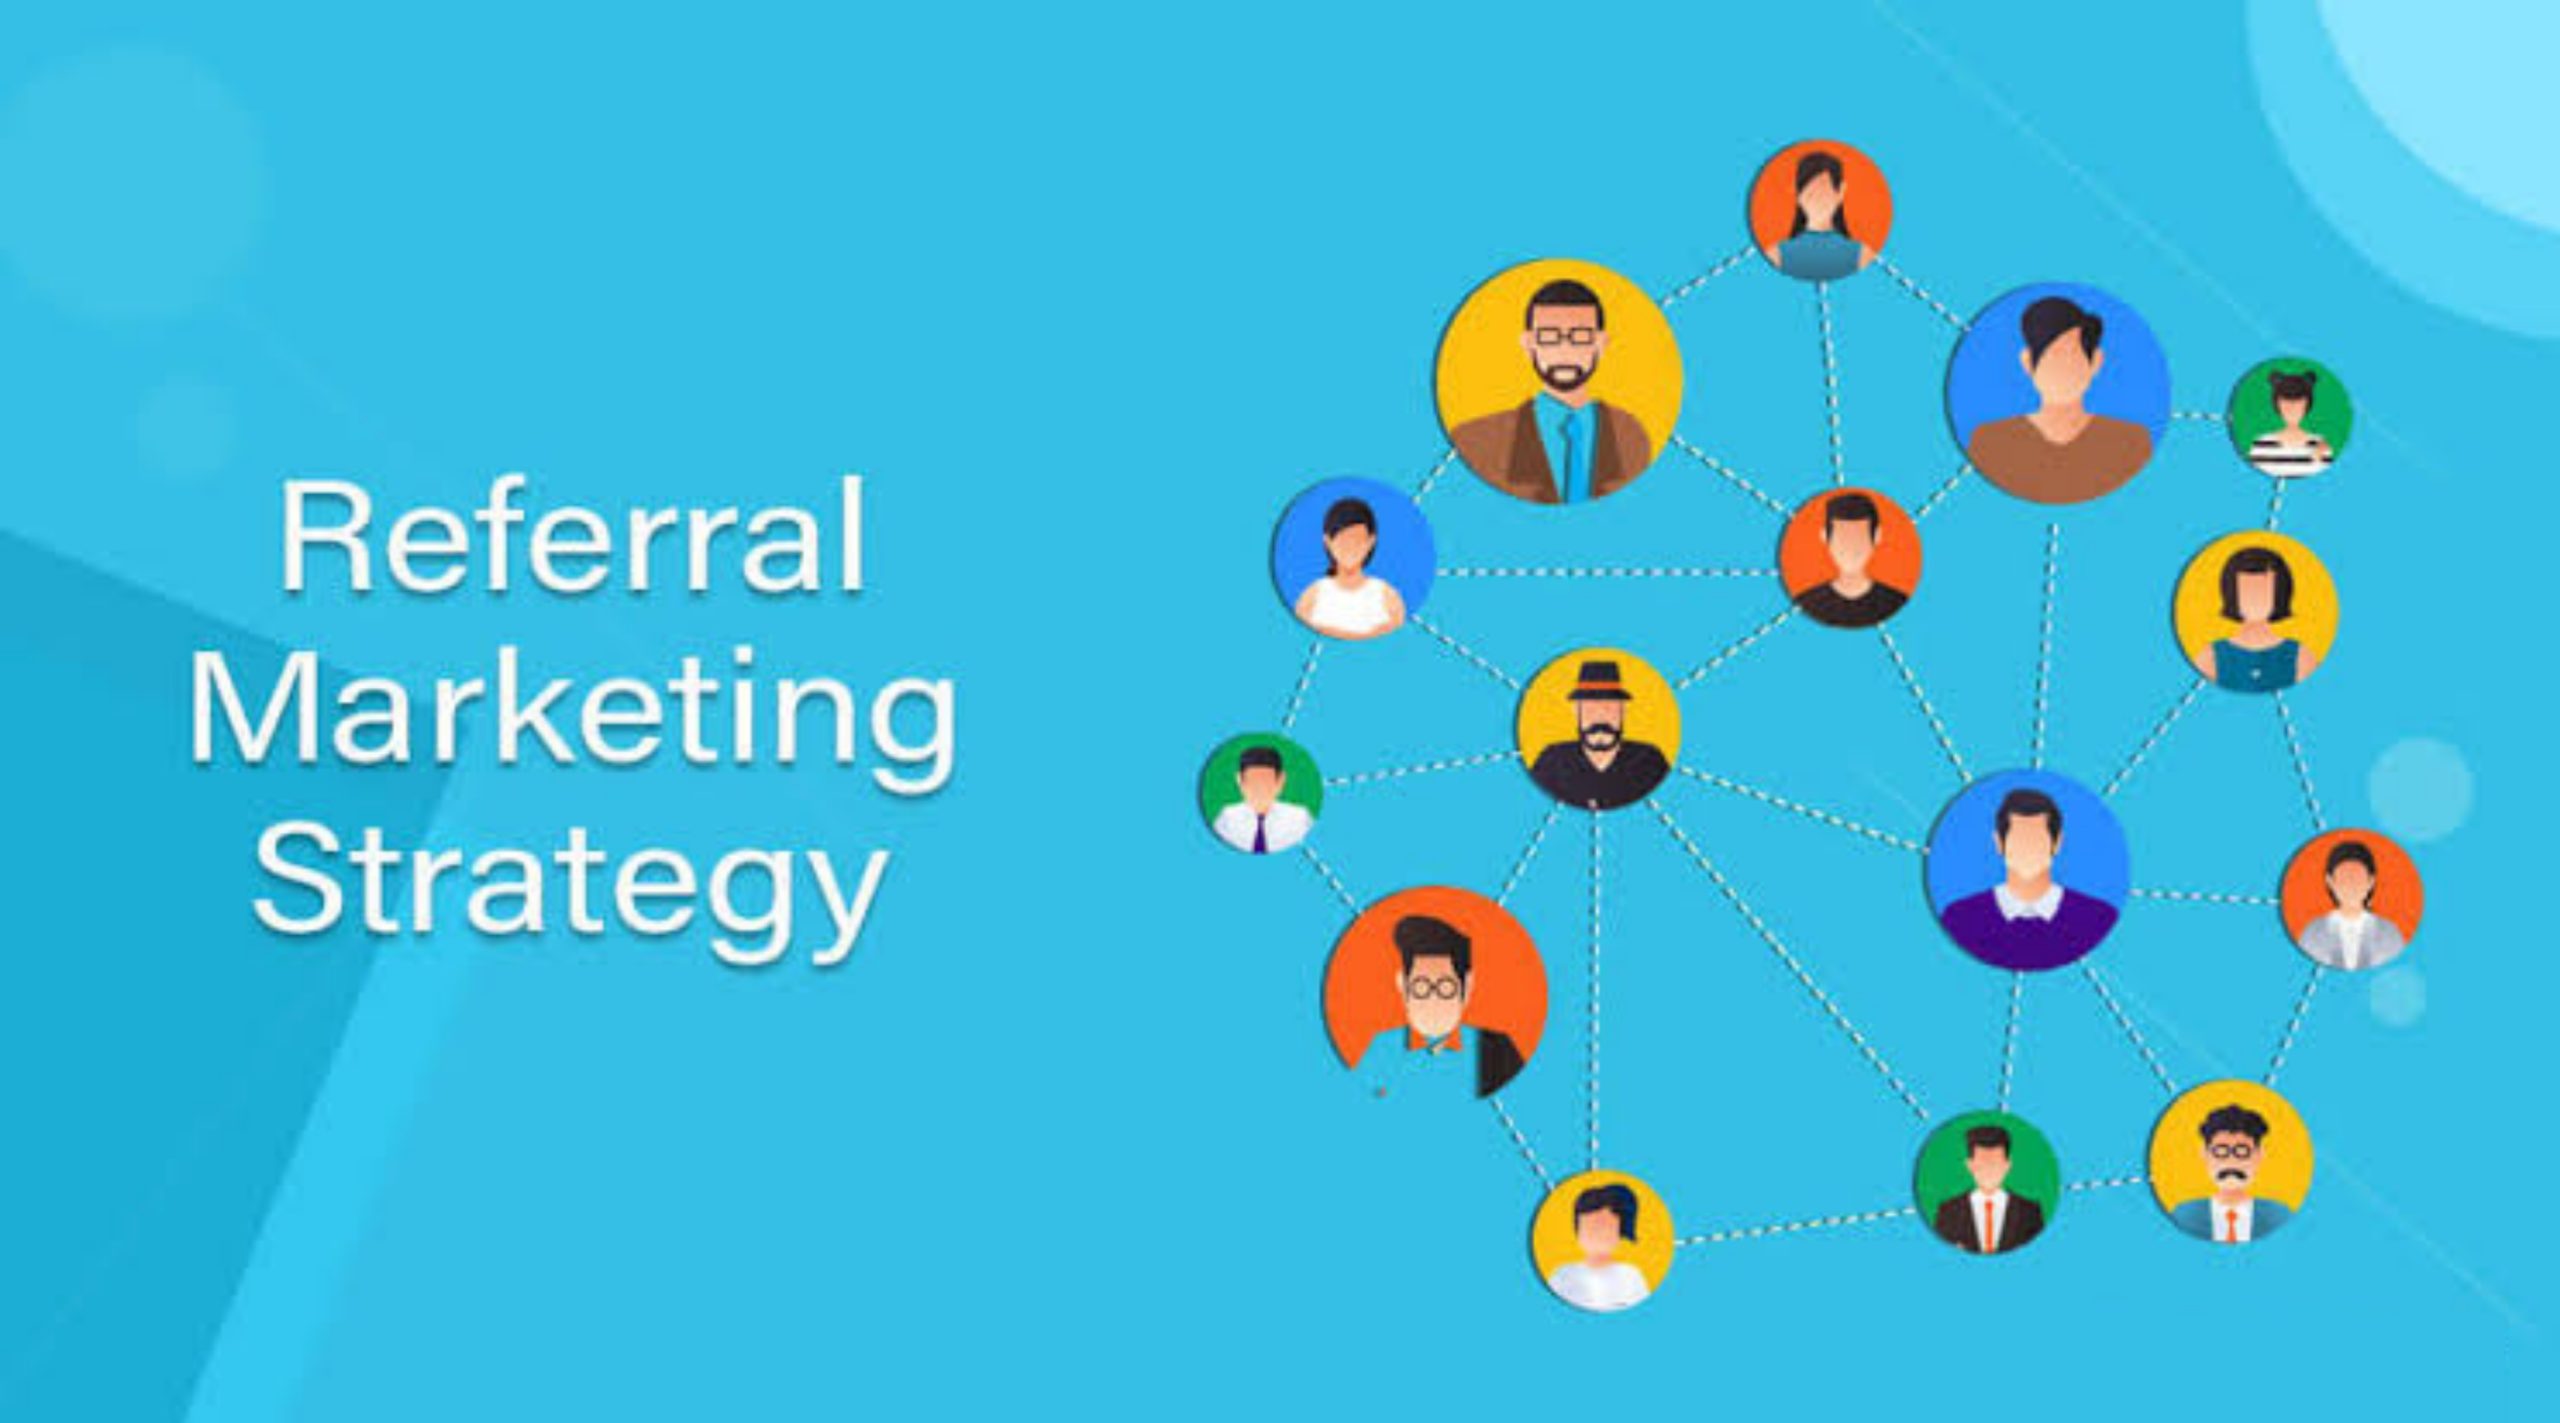 Referral Marketing - How To Get Referrals To Your Referral Programs